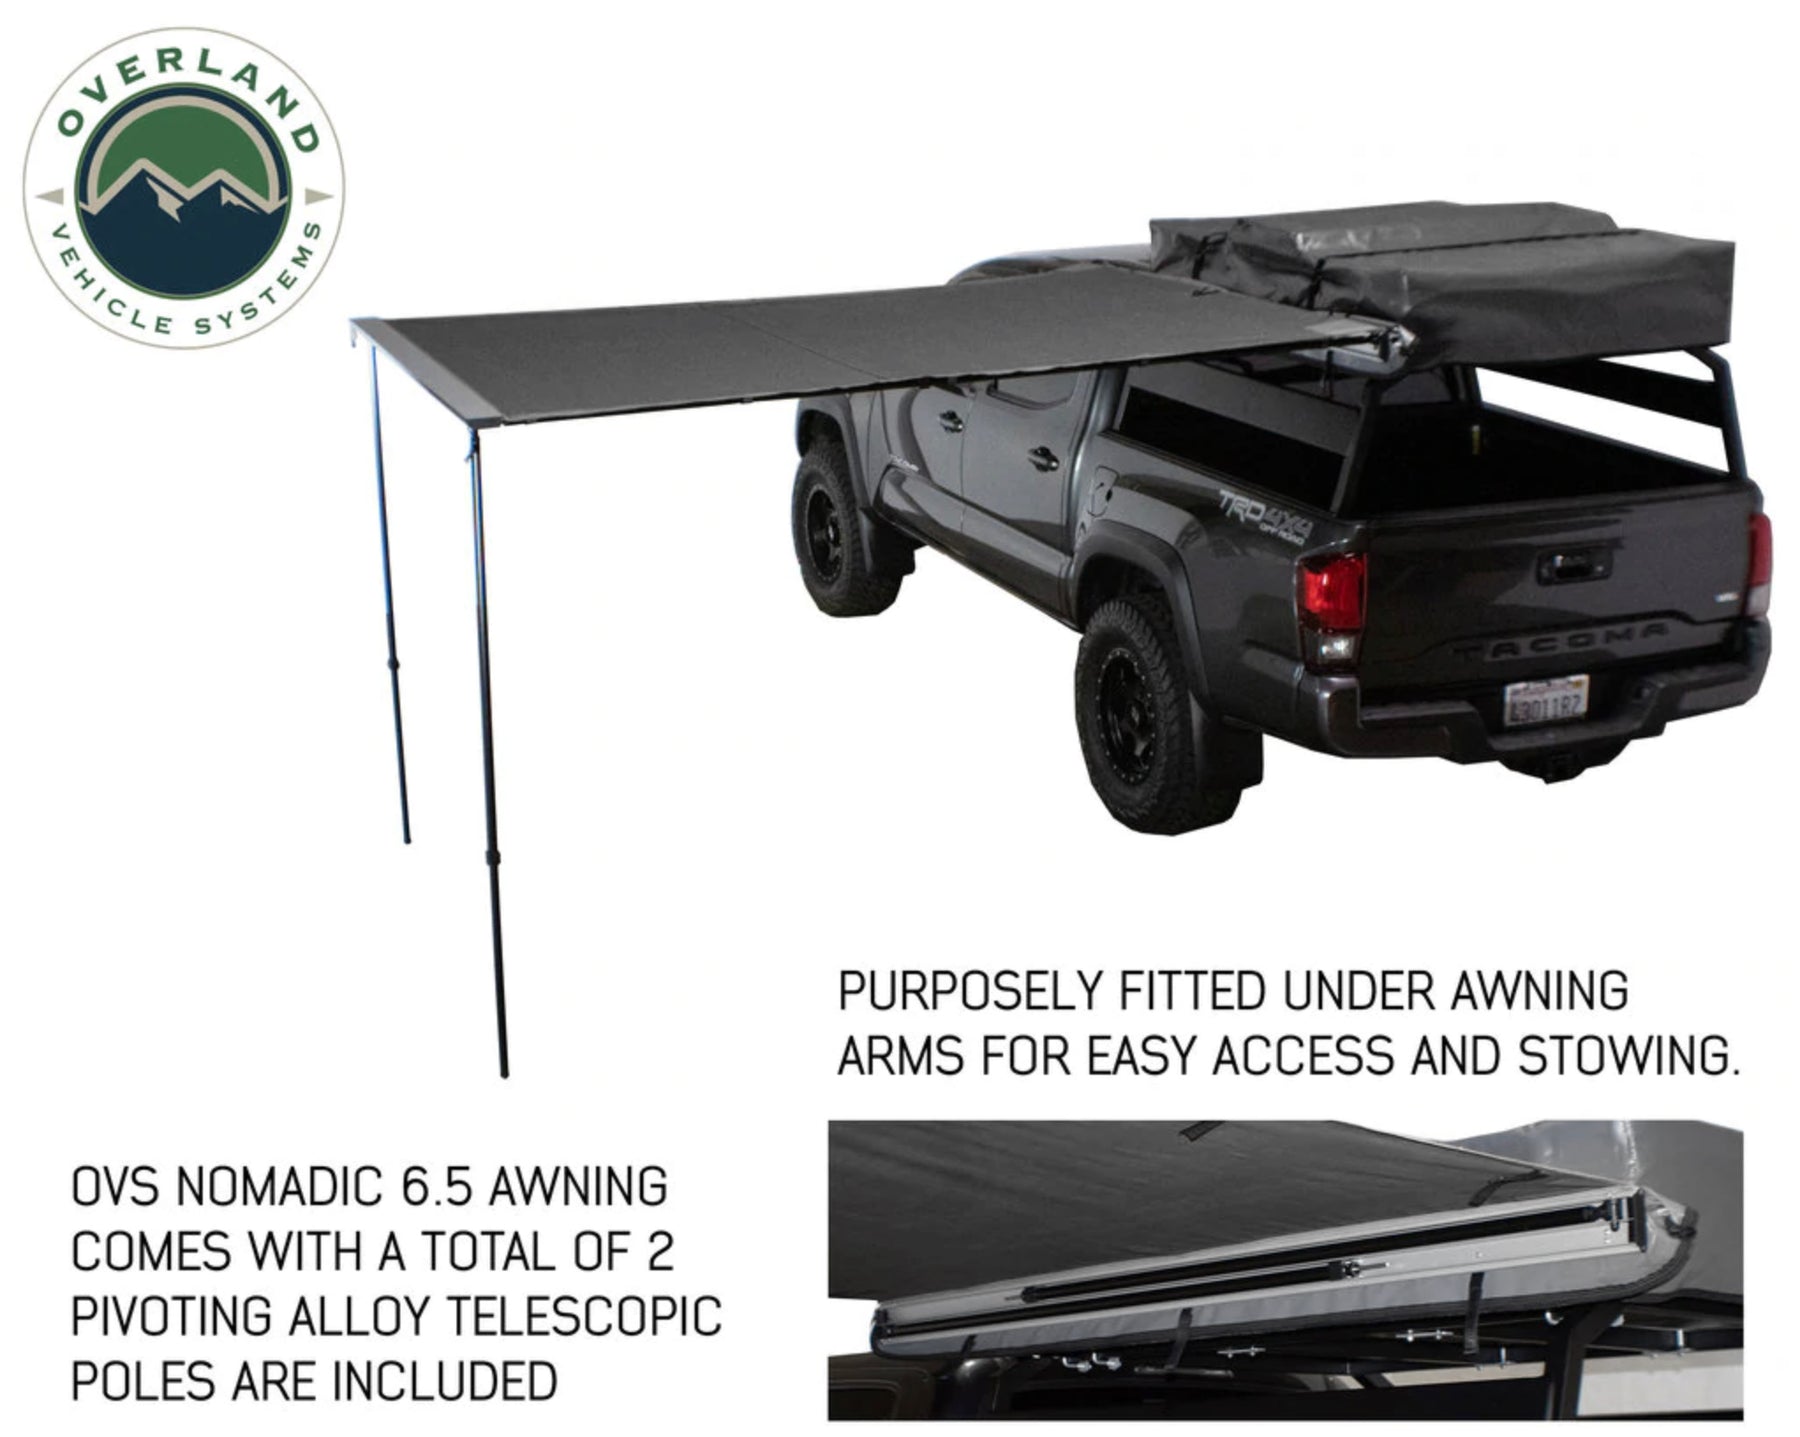 Nomadic Awning 2.0 - 6.5' With Black Cover